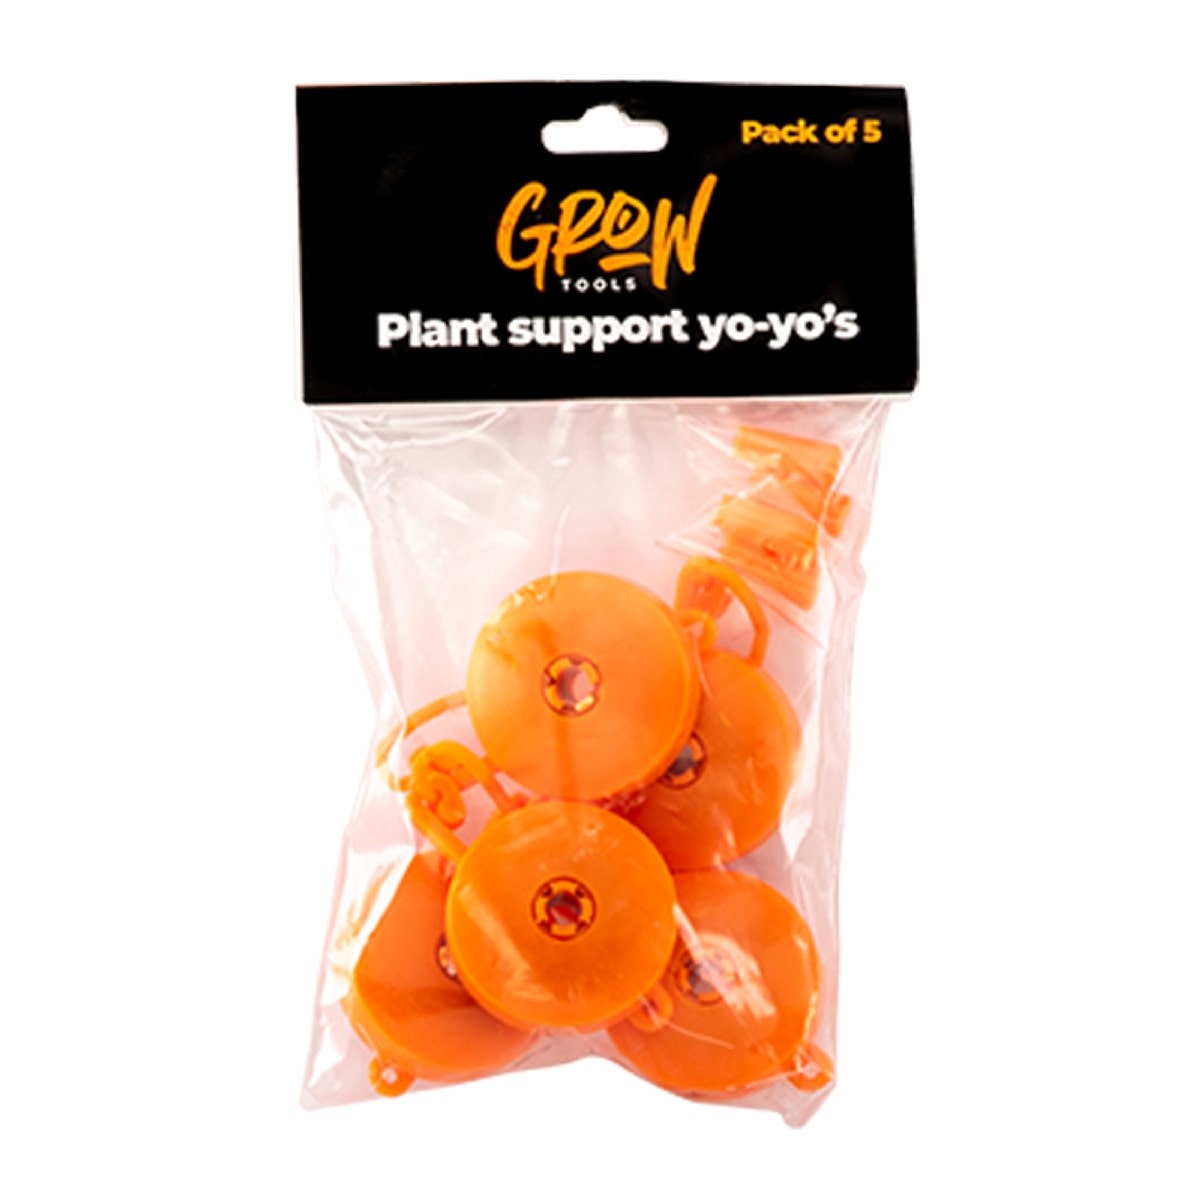 Grow Tools Plant Support Yo-Yo's (Pack of 5)